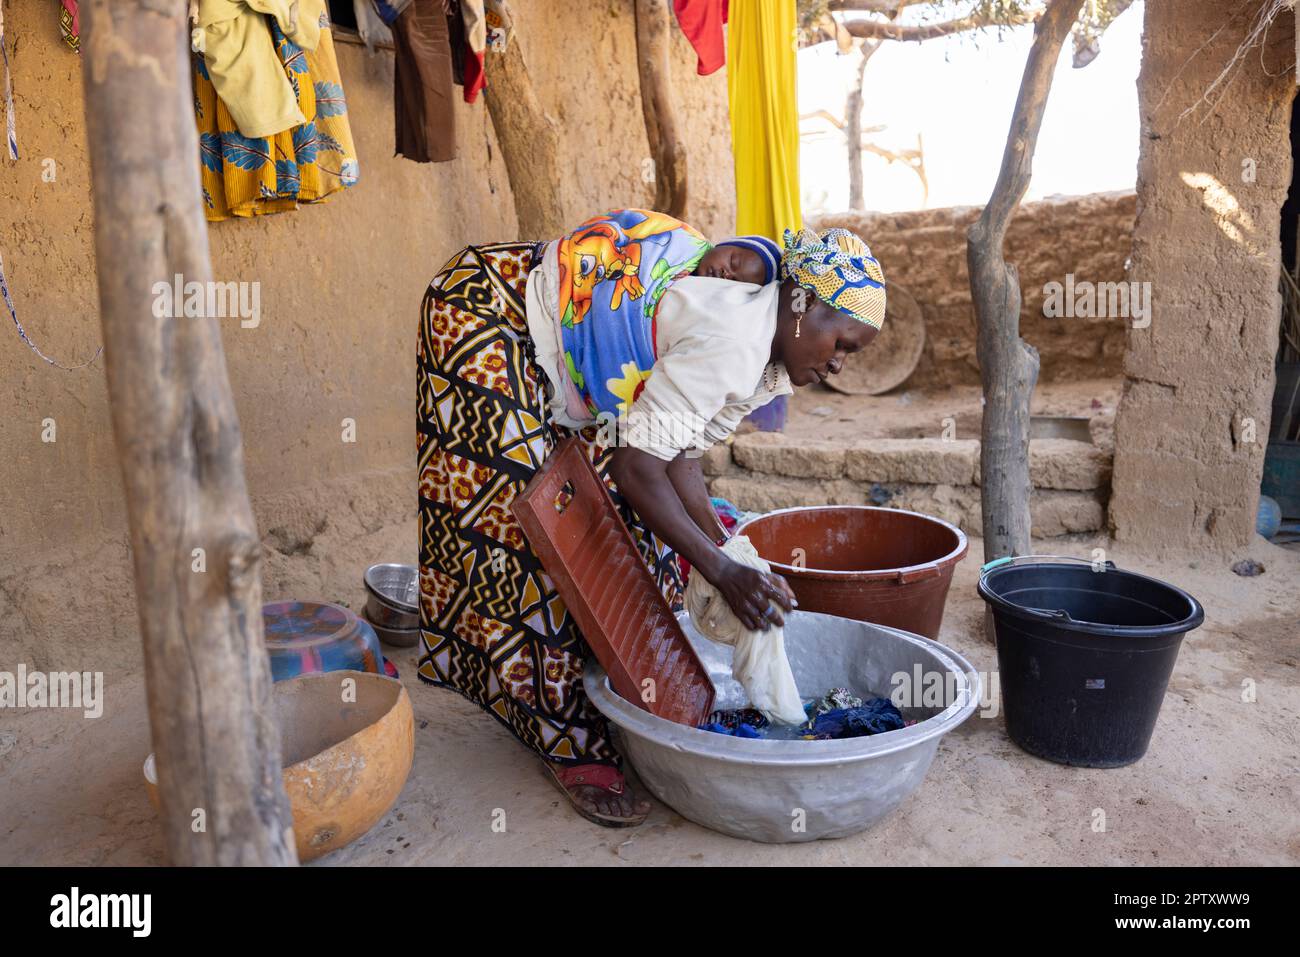 A mother washes clothes at her home while carrying her newborn baby on her back in Segou Region, Mali, West Africa. 2022 Mali drought and hunger crisis. Stock Photo